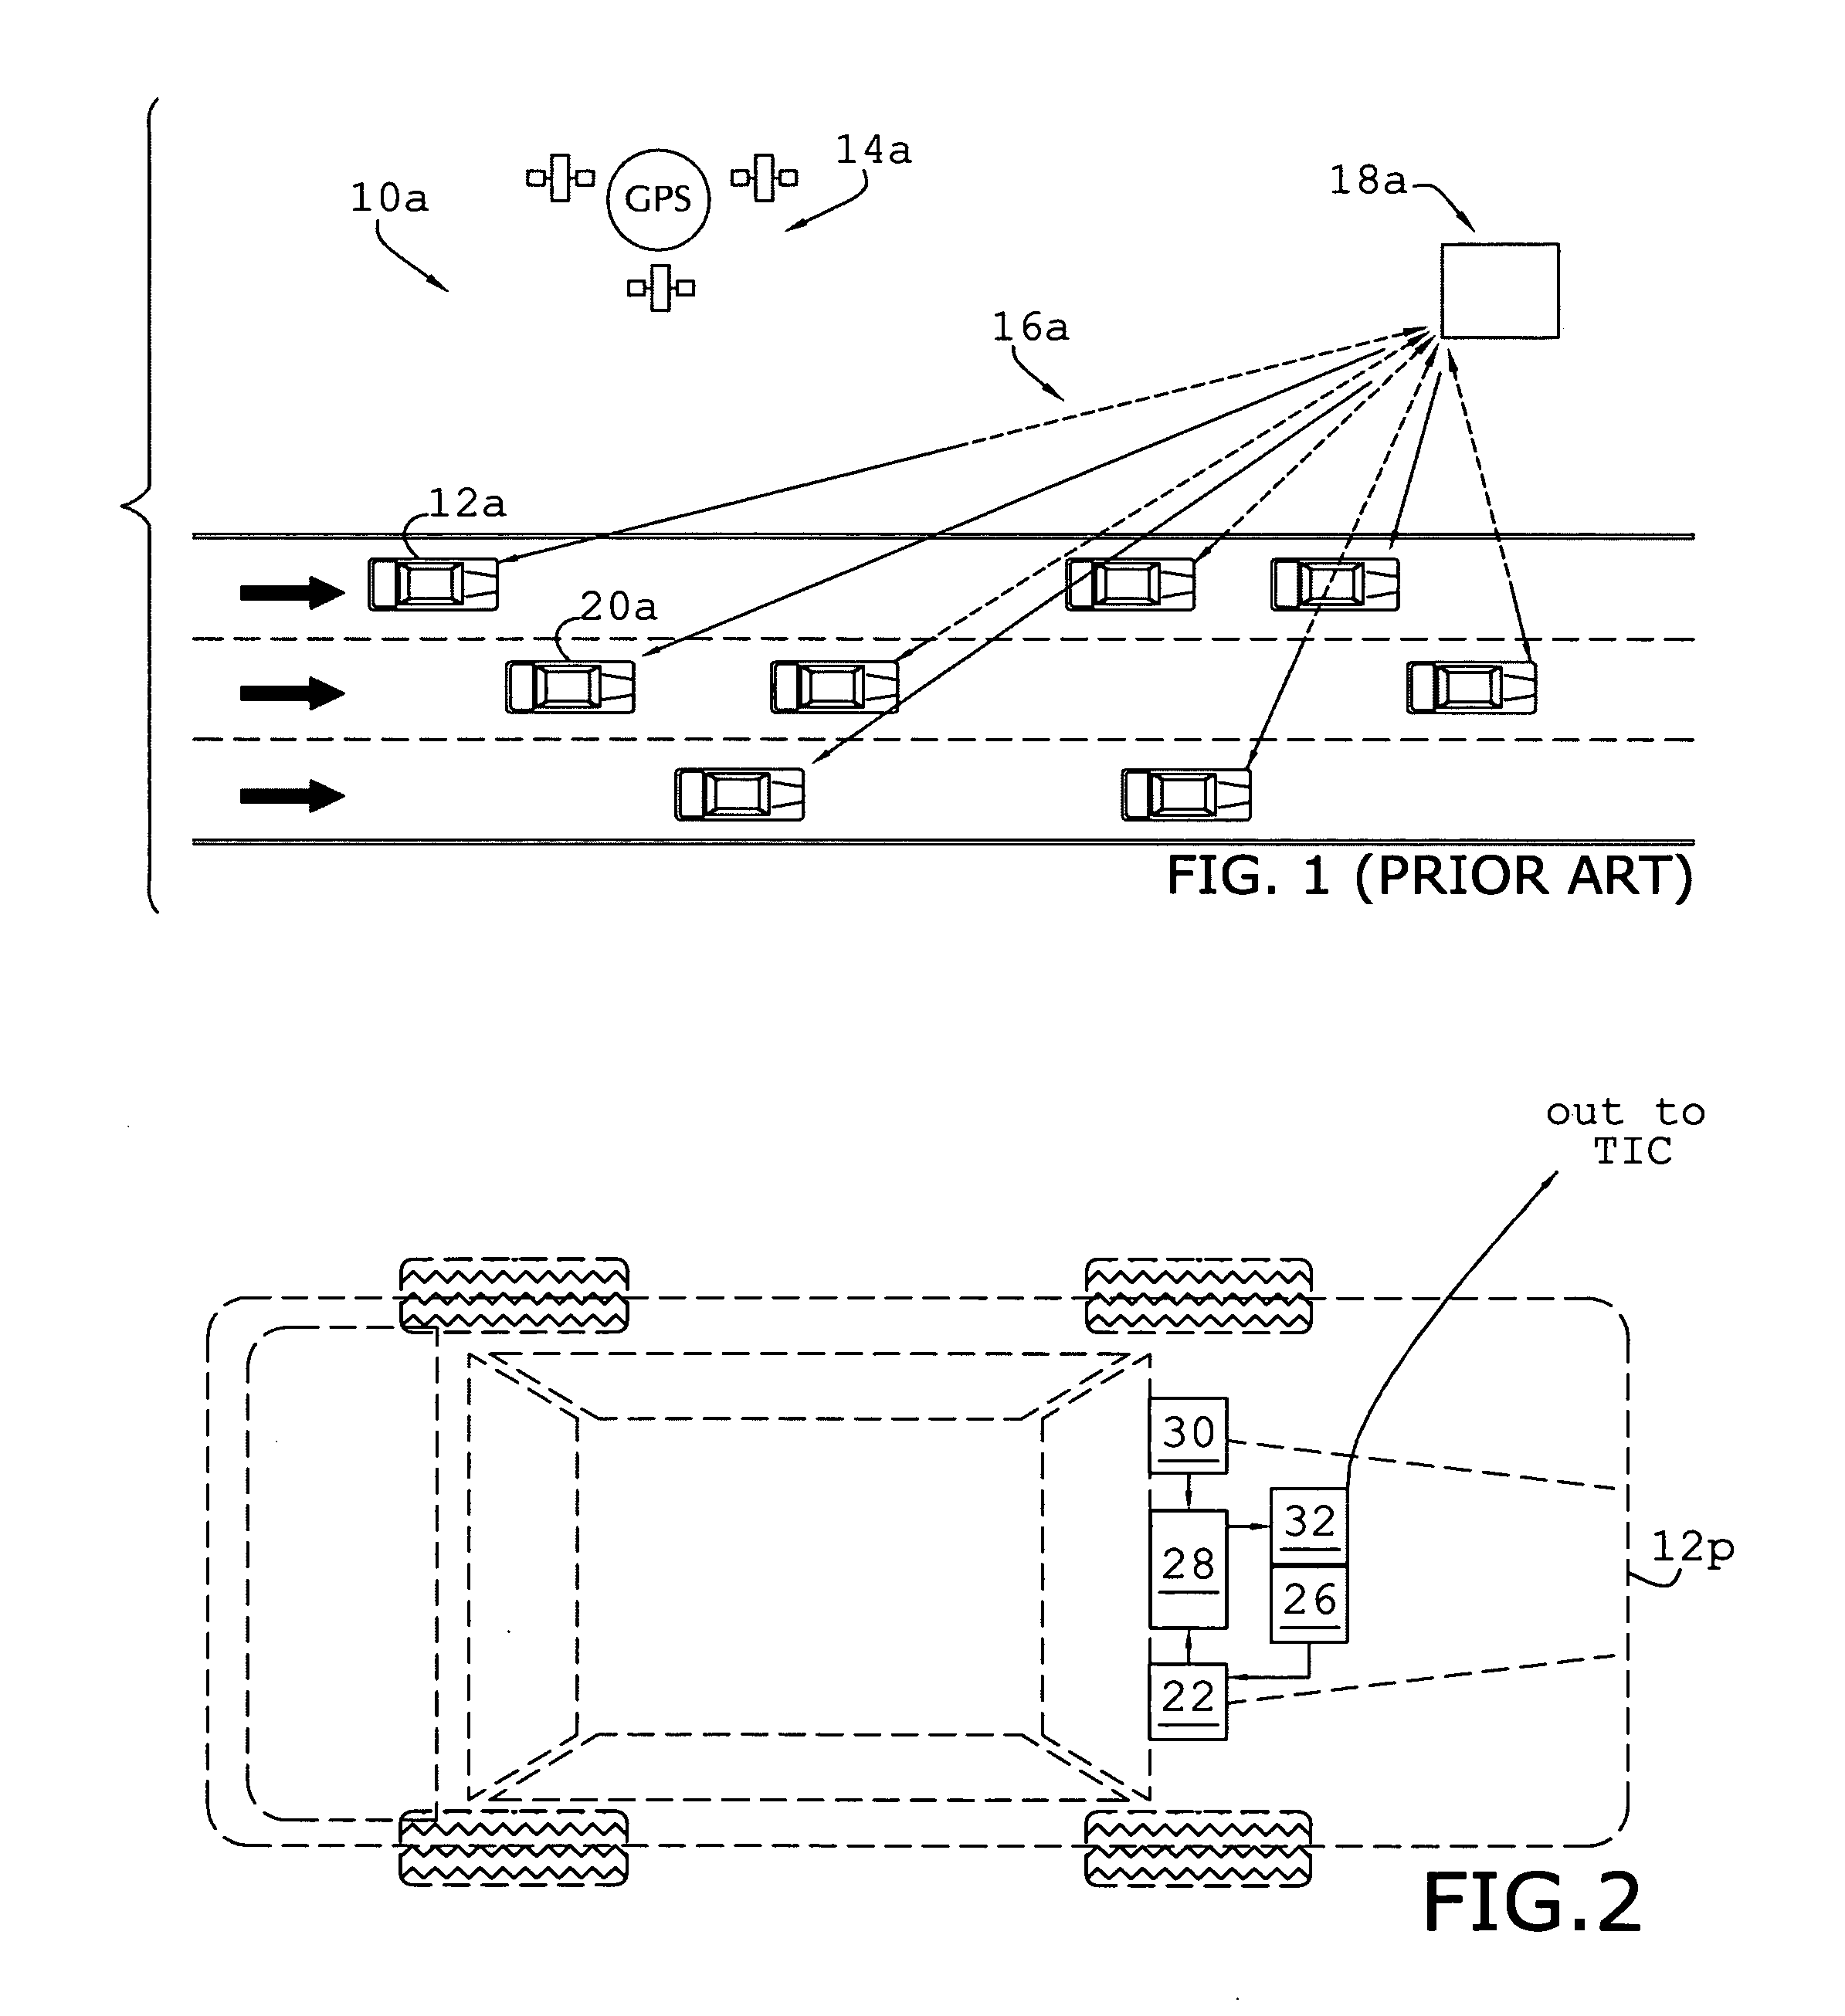 System for and method of monitoring real time traffic conditions using probe vehicles